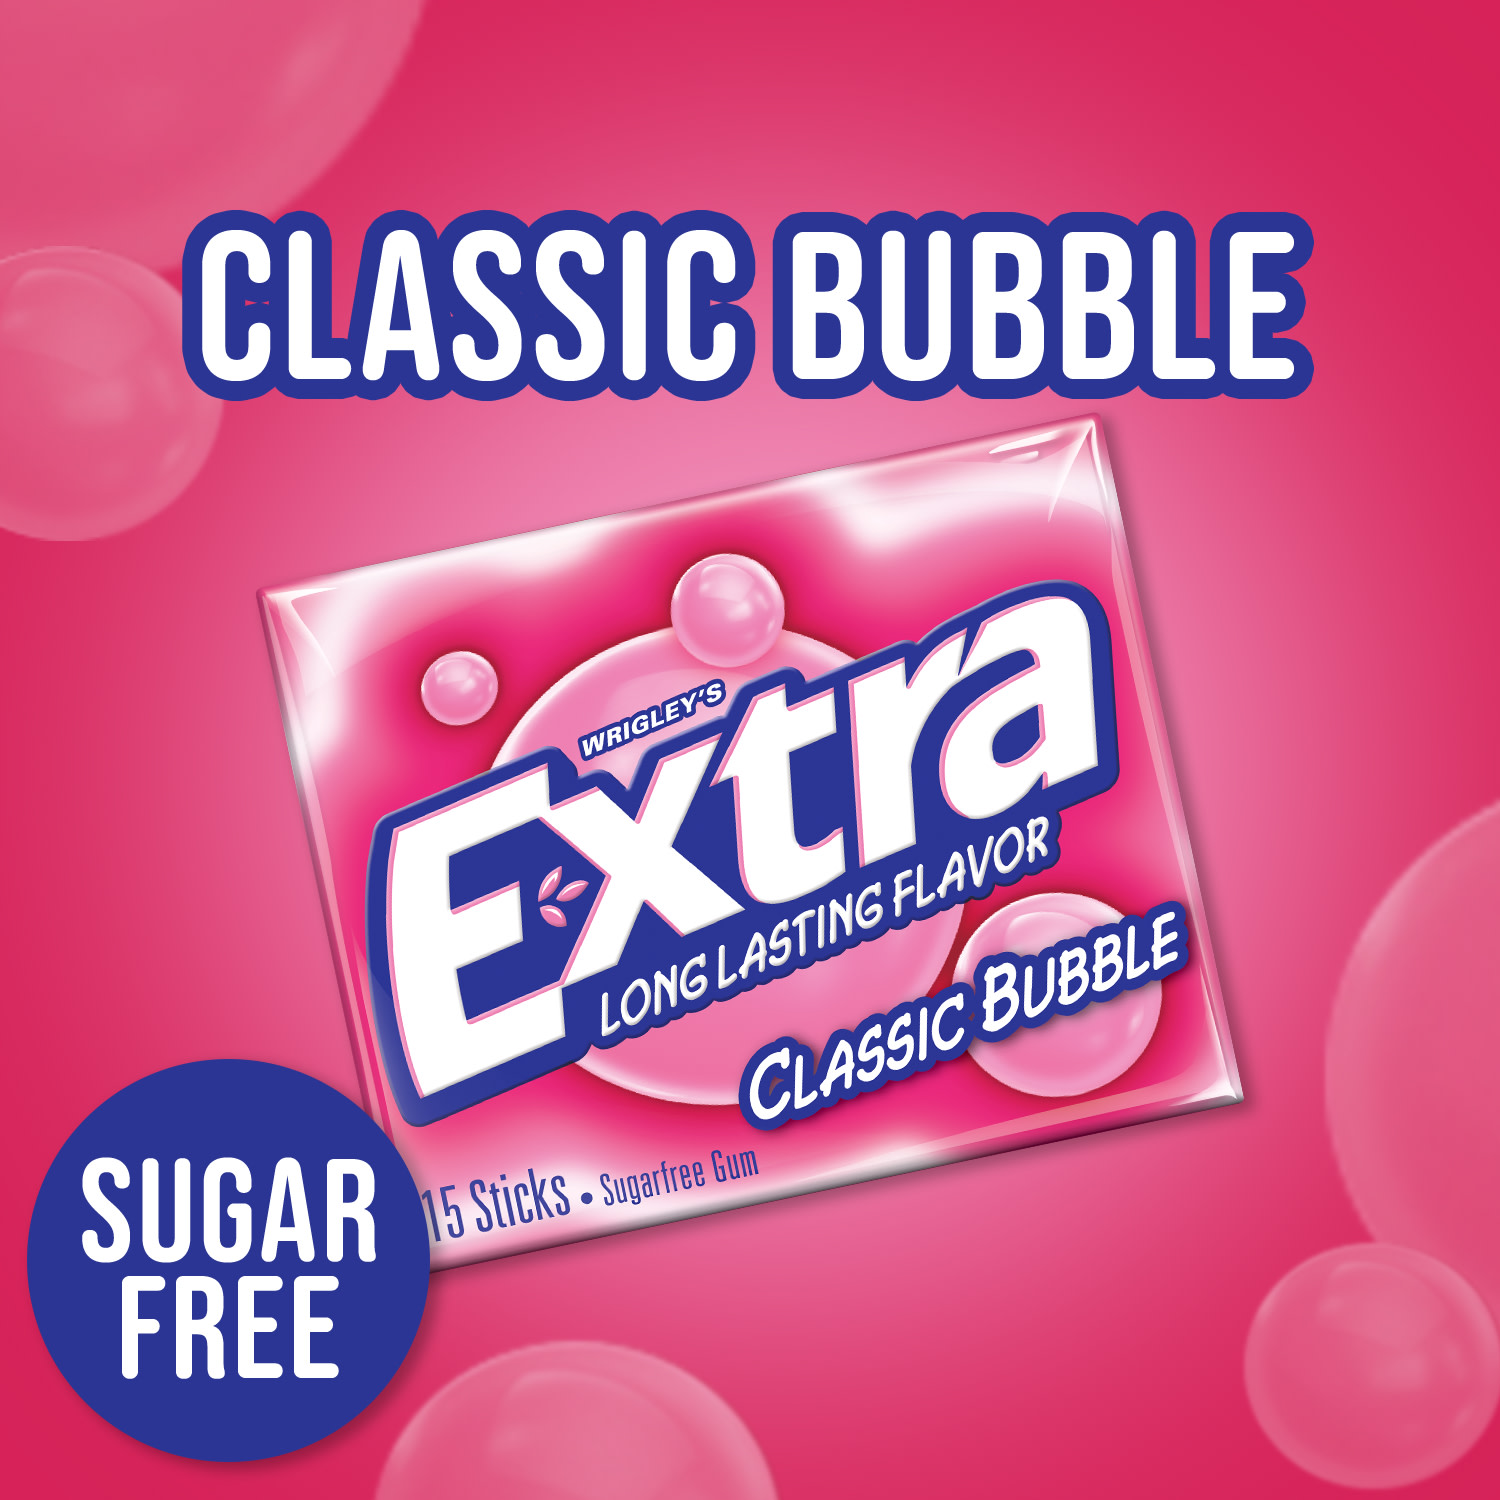 Extra Classic Bubble Gum Sugar Free Back to School Chewing Gum- 3 Pack - image 4 of 15